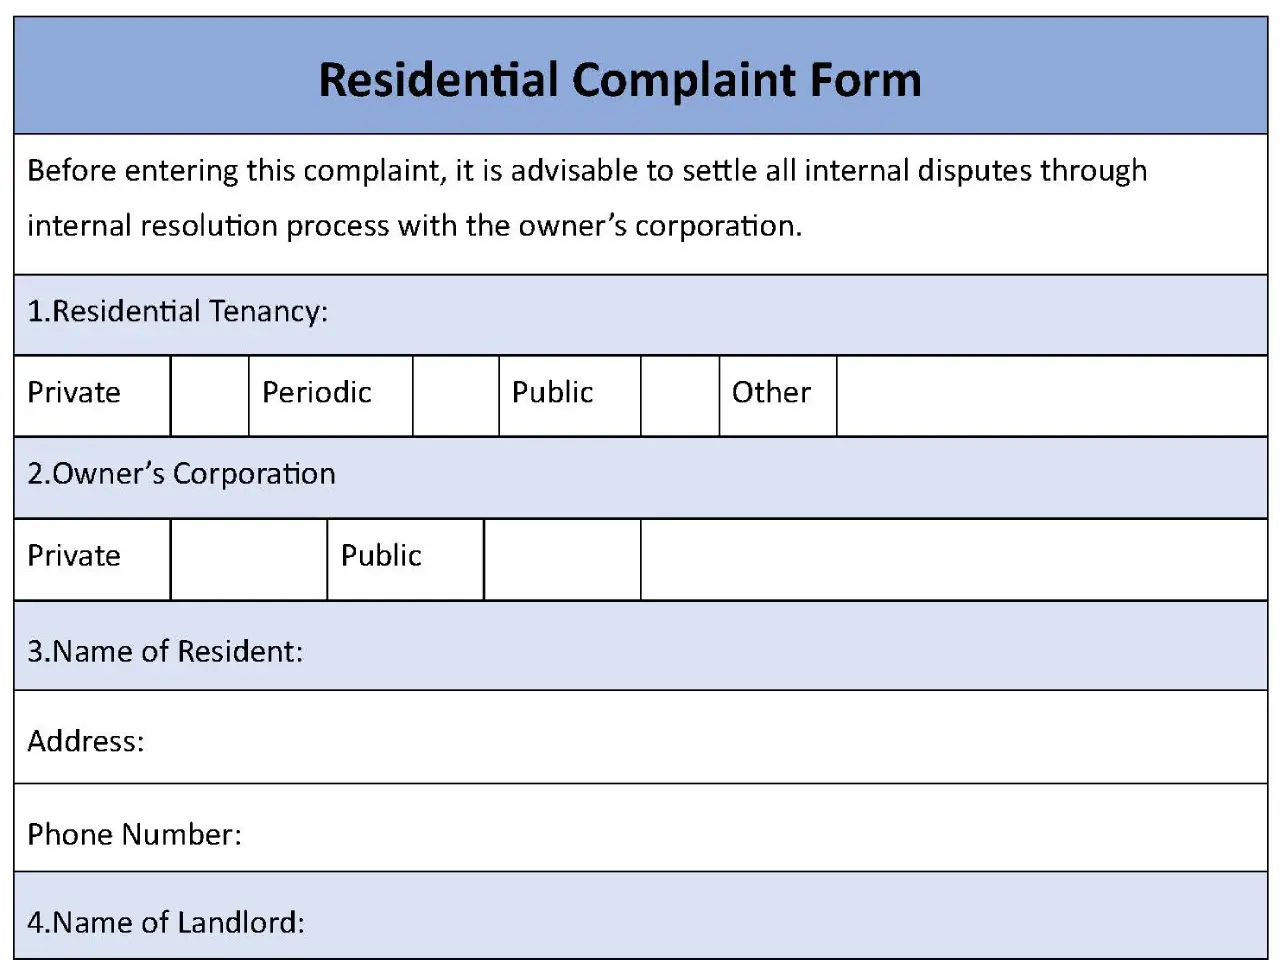 Residential Complaint Form